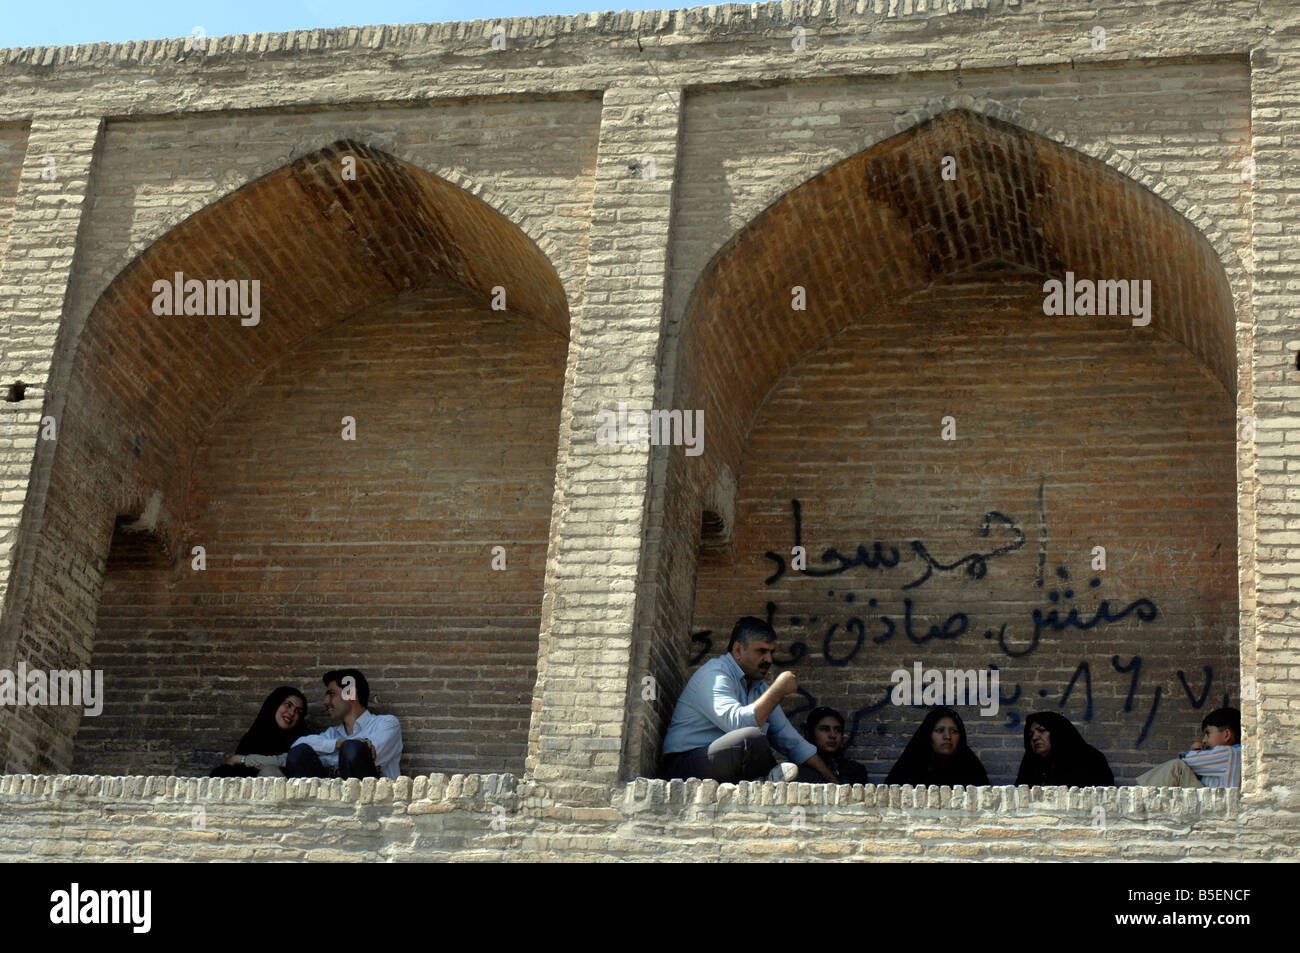 Iranians gather in the arches of the 298m Si-o-Seh Bridge, Esfahan Stock Photo